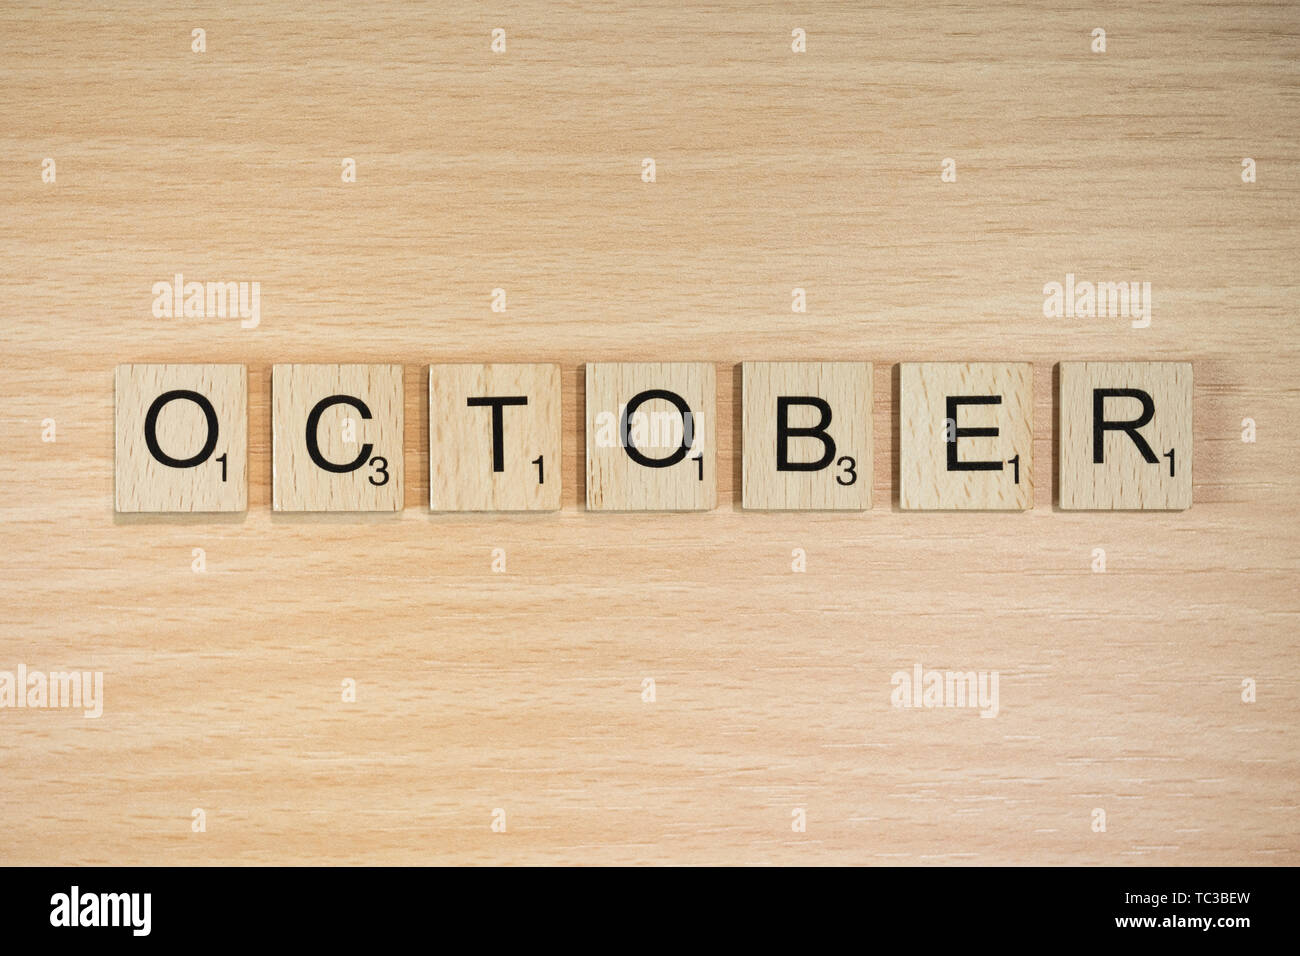 The word October, spelt out using wooden tiles on a wood effect background with scrabble numbered score values. Stock Photo